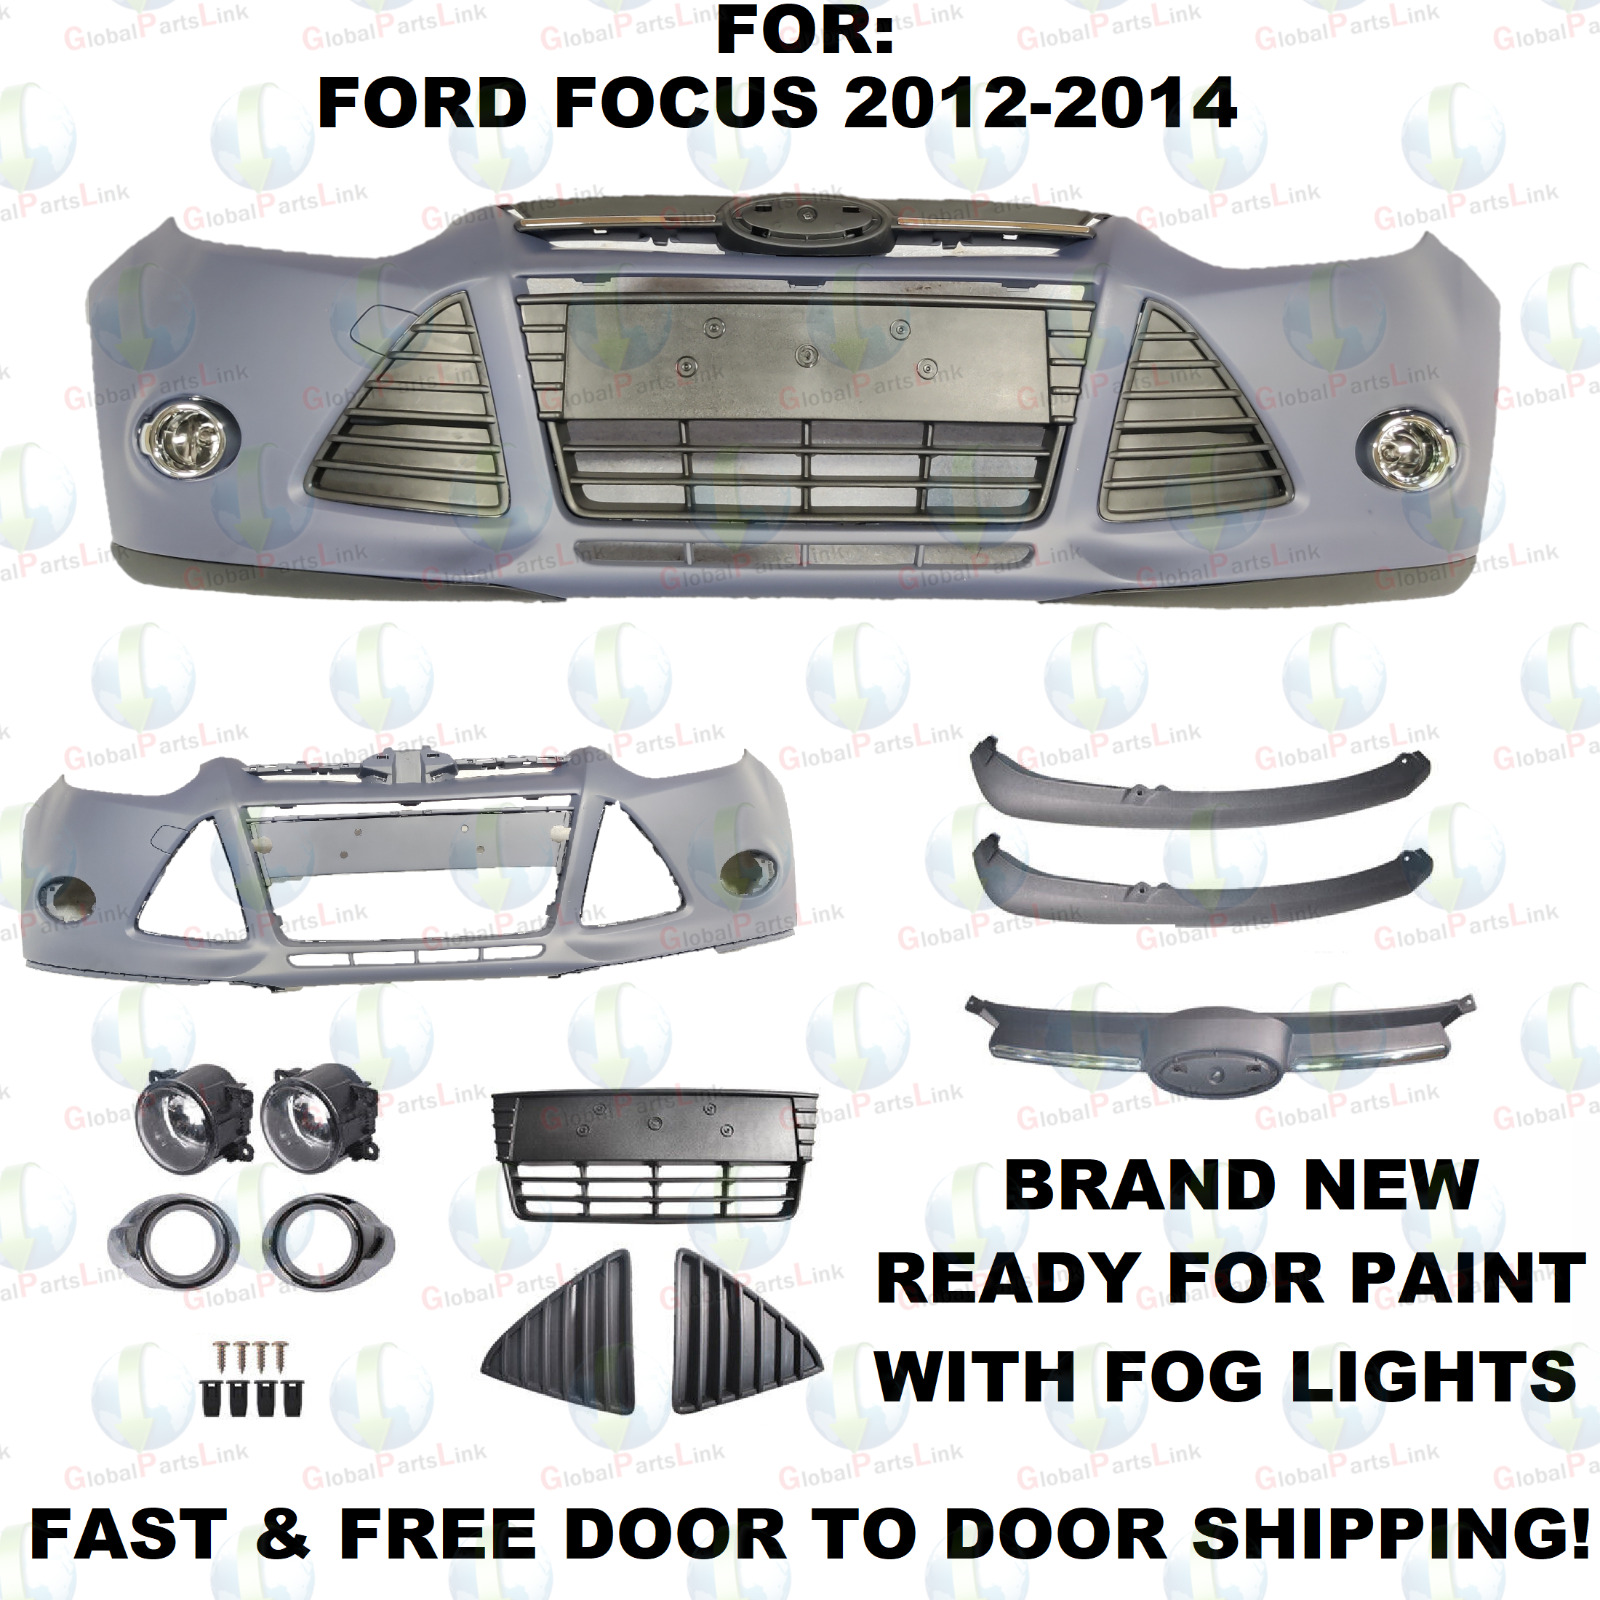 For 2012-2014 Ford Focus Front Bumper Cover & Front Grille Fog Lights Assembly